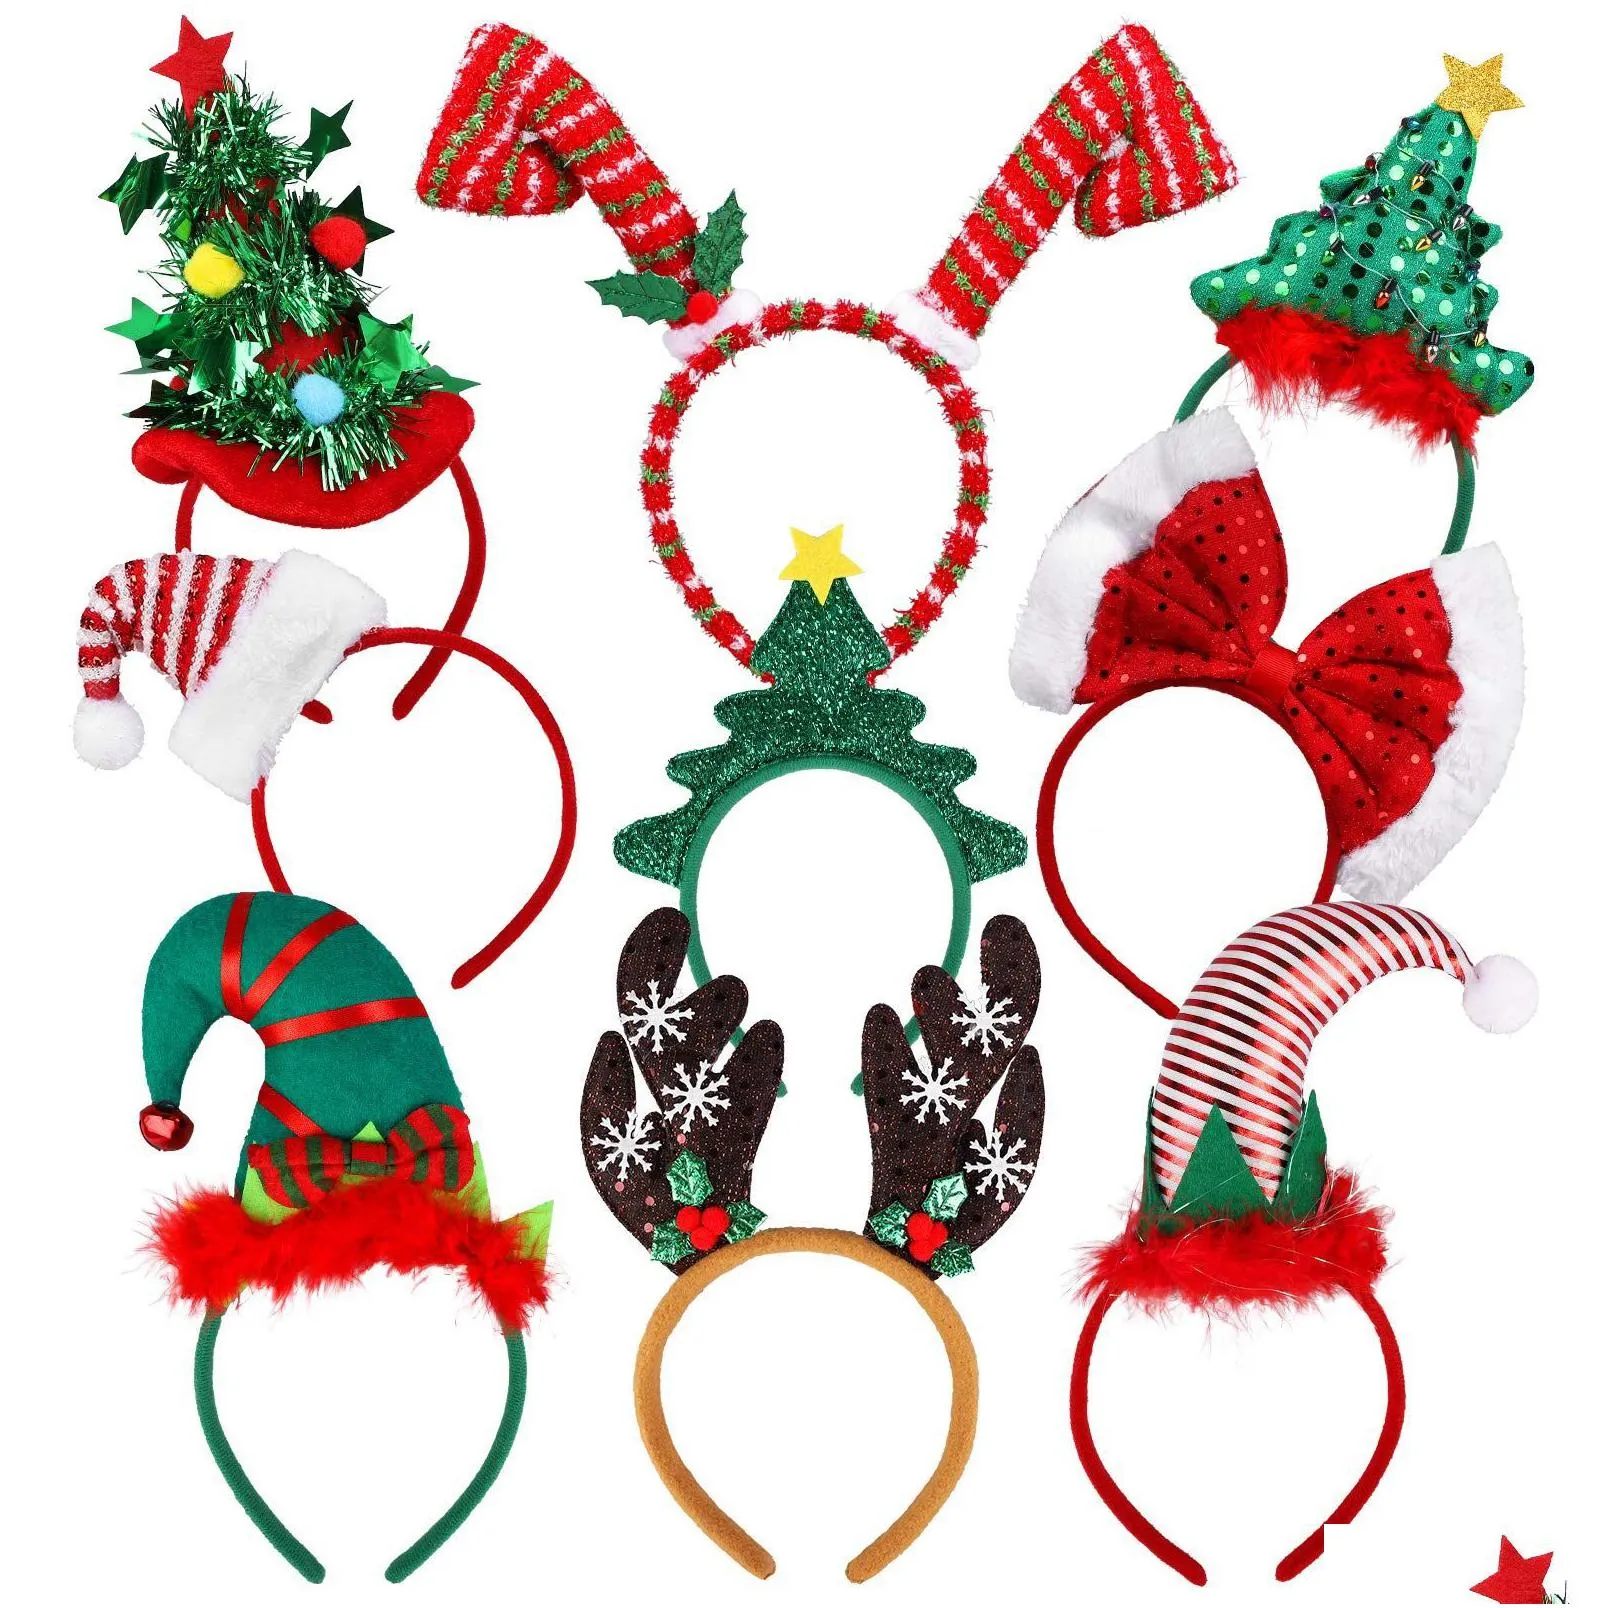 Christmas Decorations Christmas Decorations L Led Headband Reindeer Antlers Light Up Headwear Costume Accessories For Xmas Party Holid Dhsoj